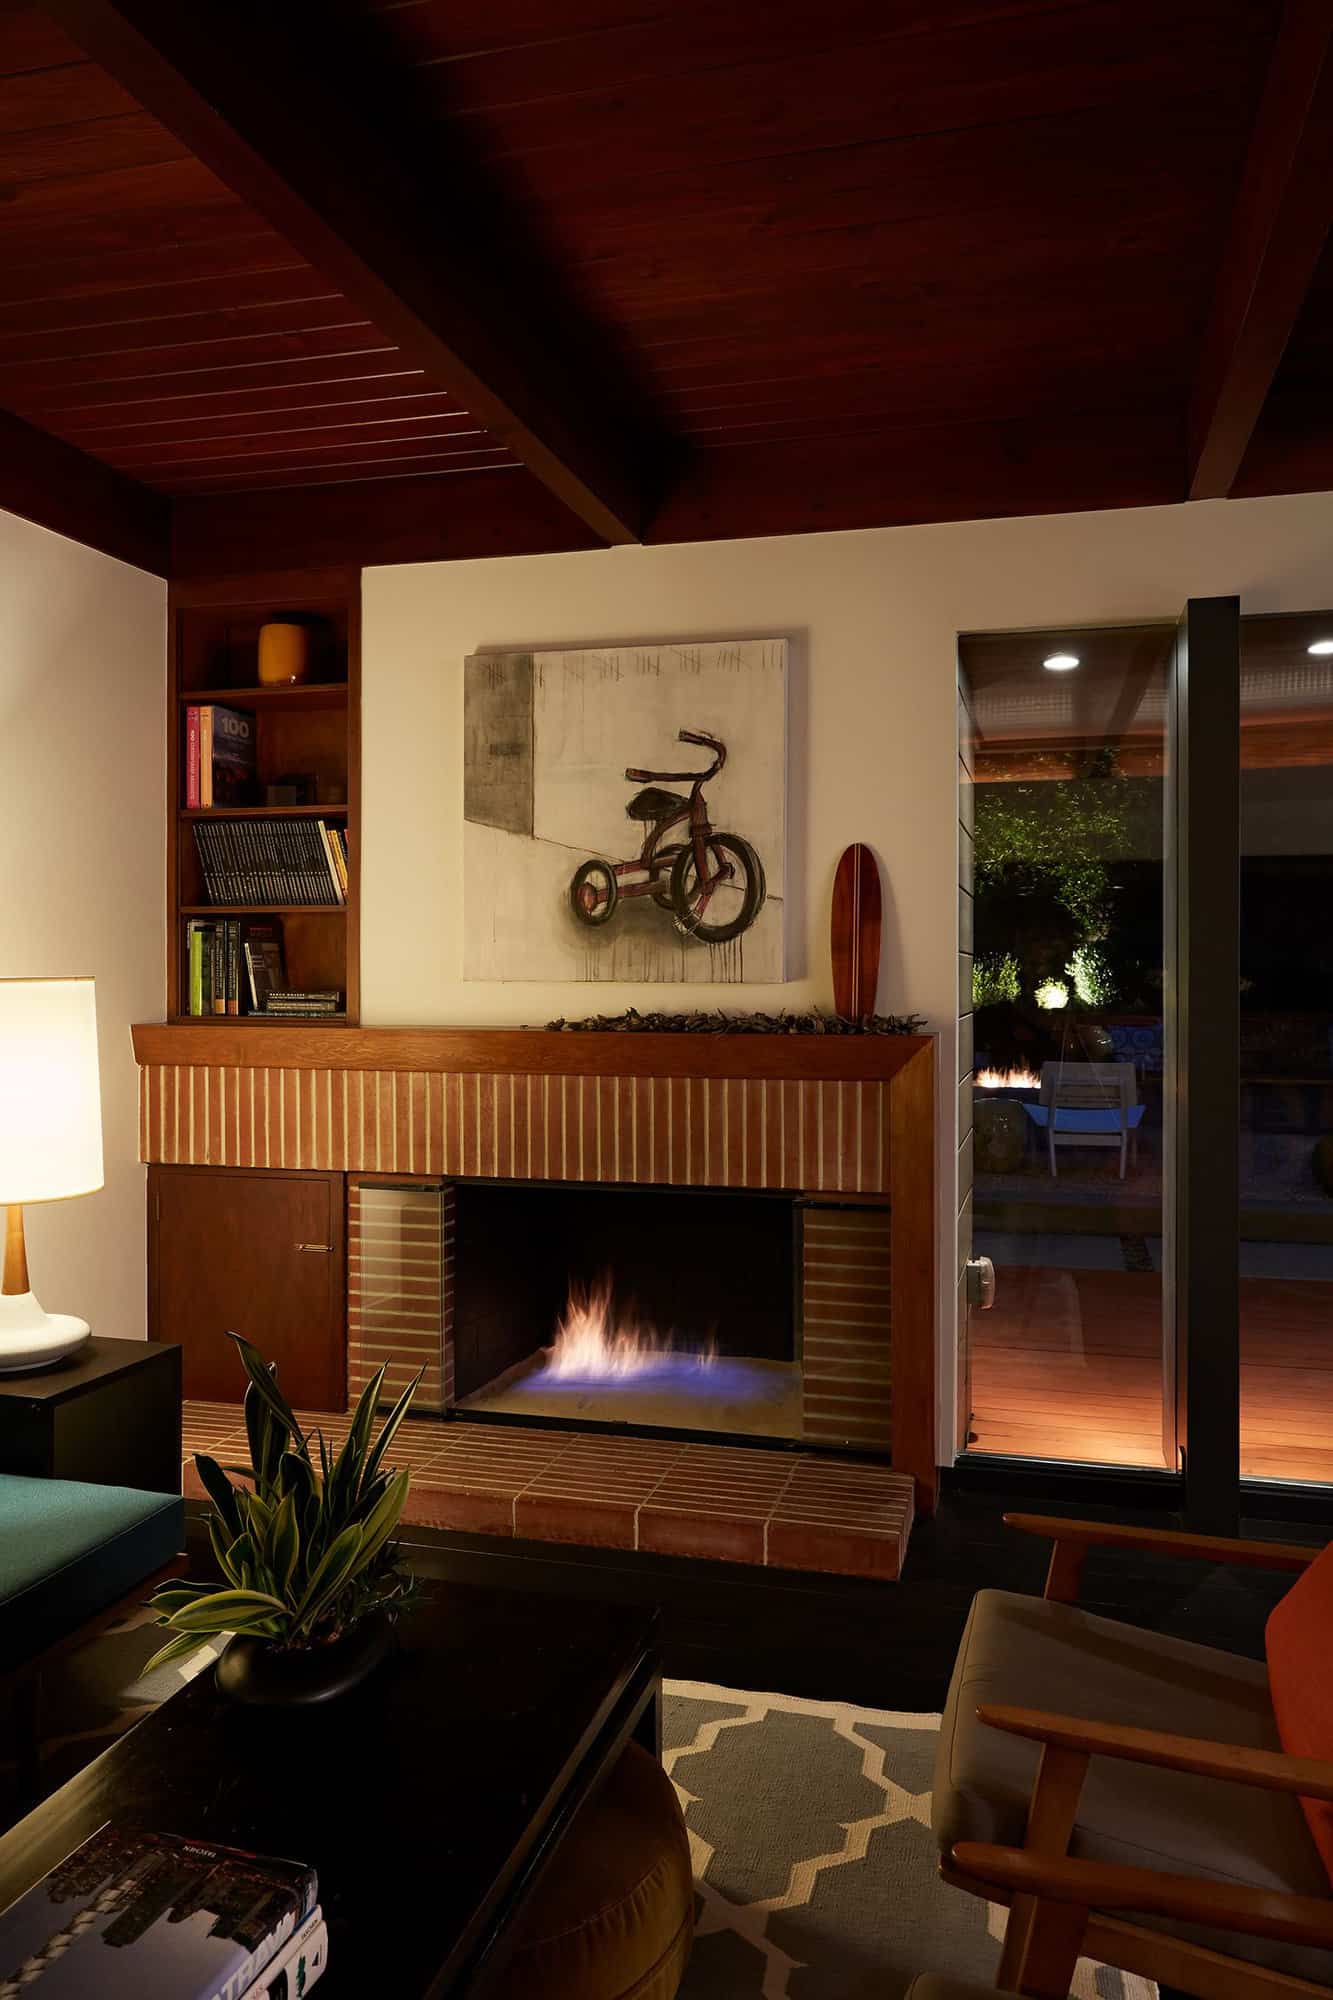 mid-century-modern-living-room-with-a-fireplace-at-dusk